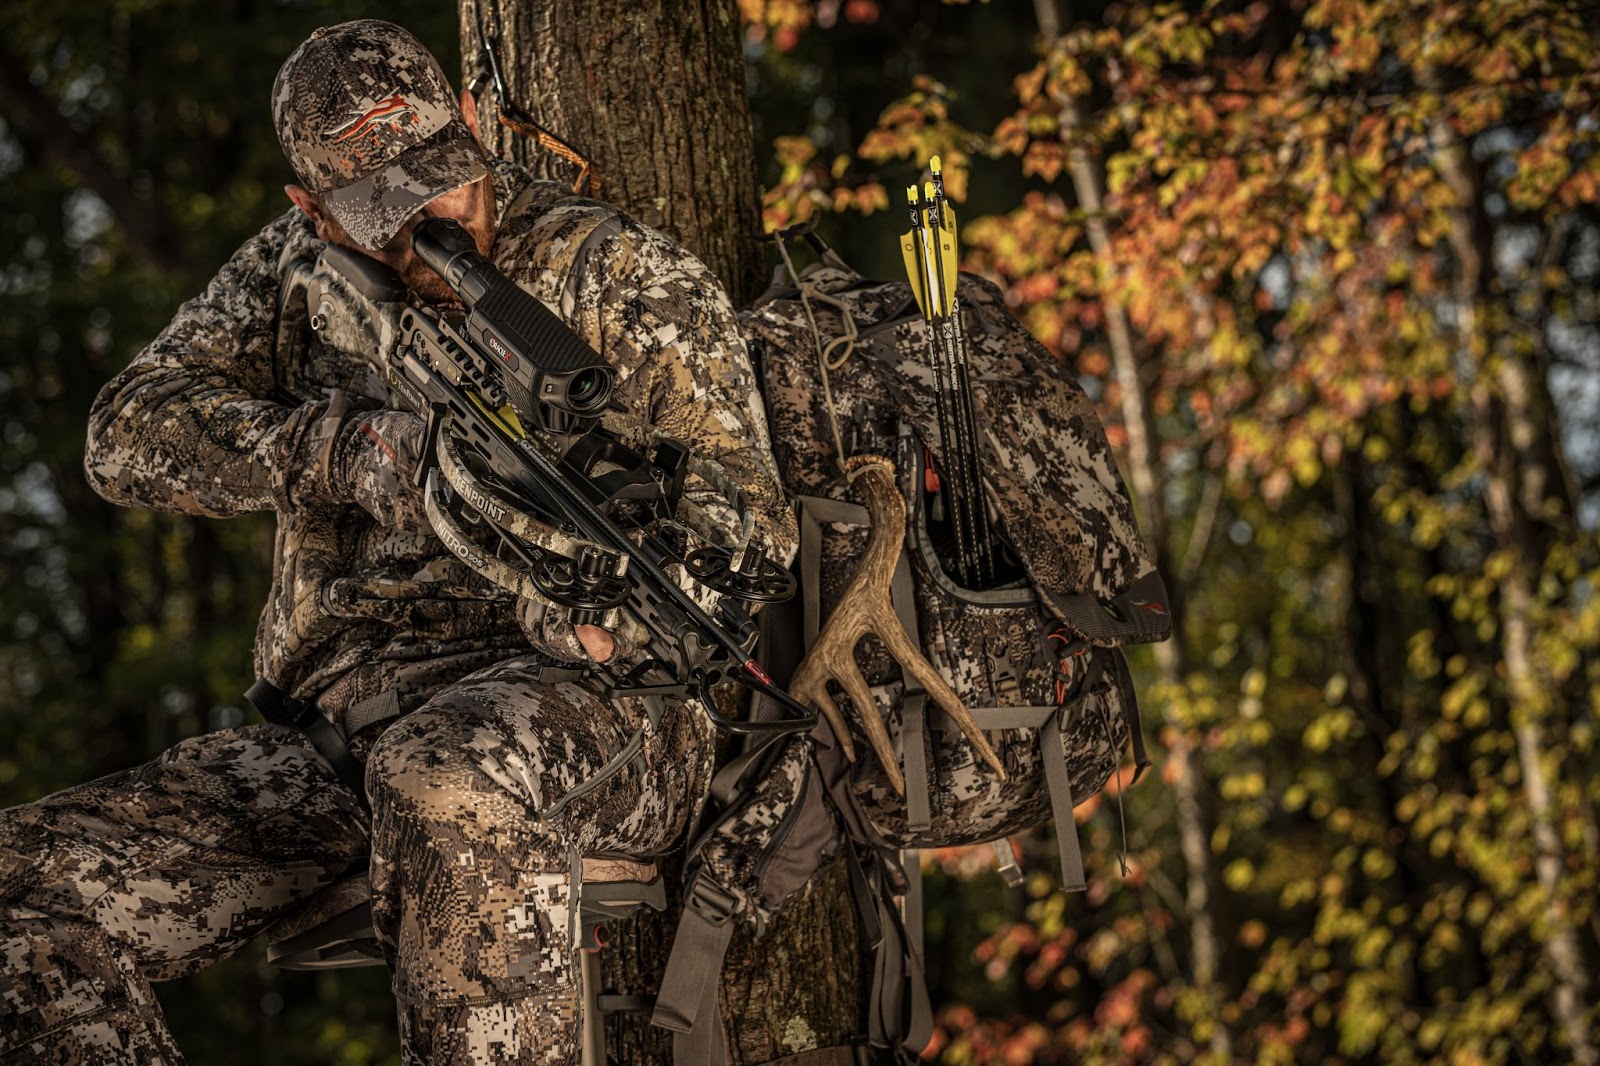 Crossbow hunter in tree stand takes aim at quarry below. 